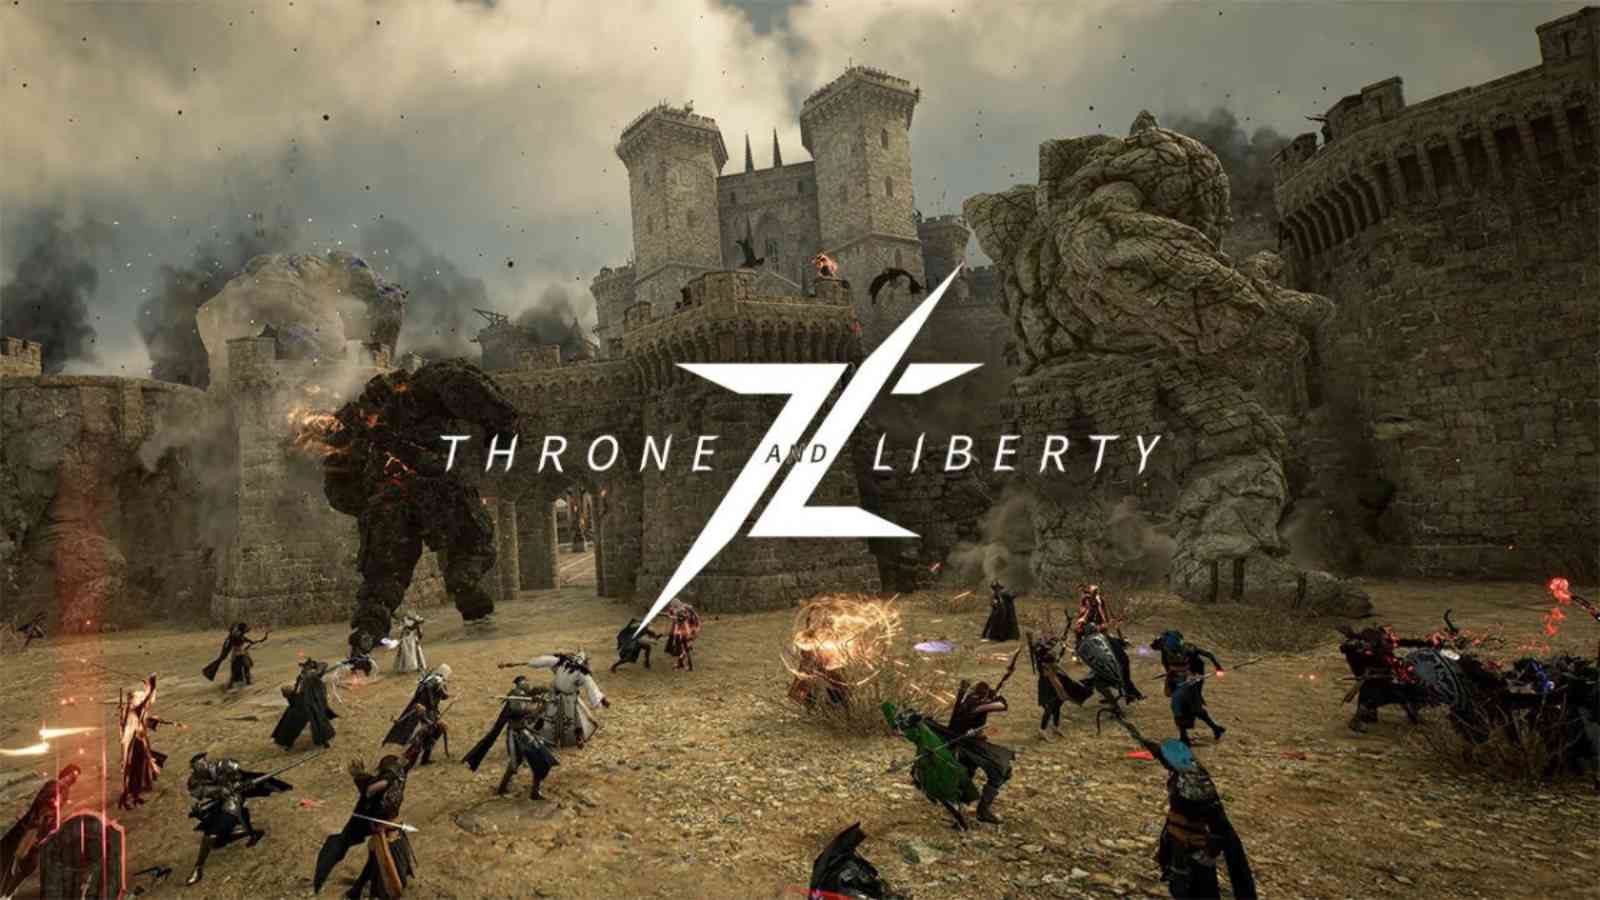 Throne And Liberty Release Date: Story, Cost, Where to Buy